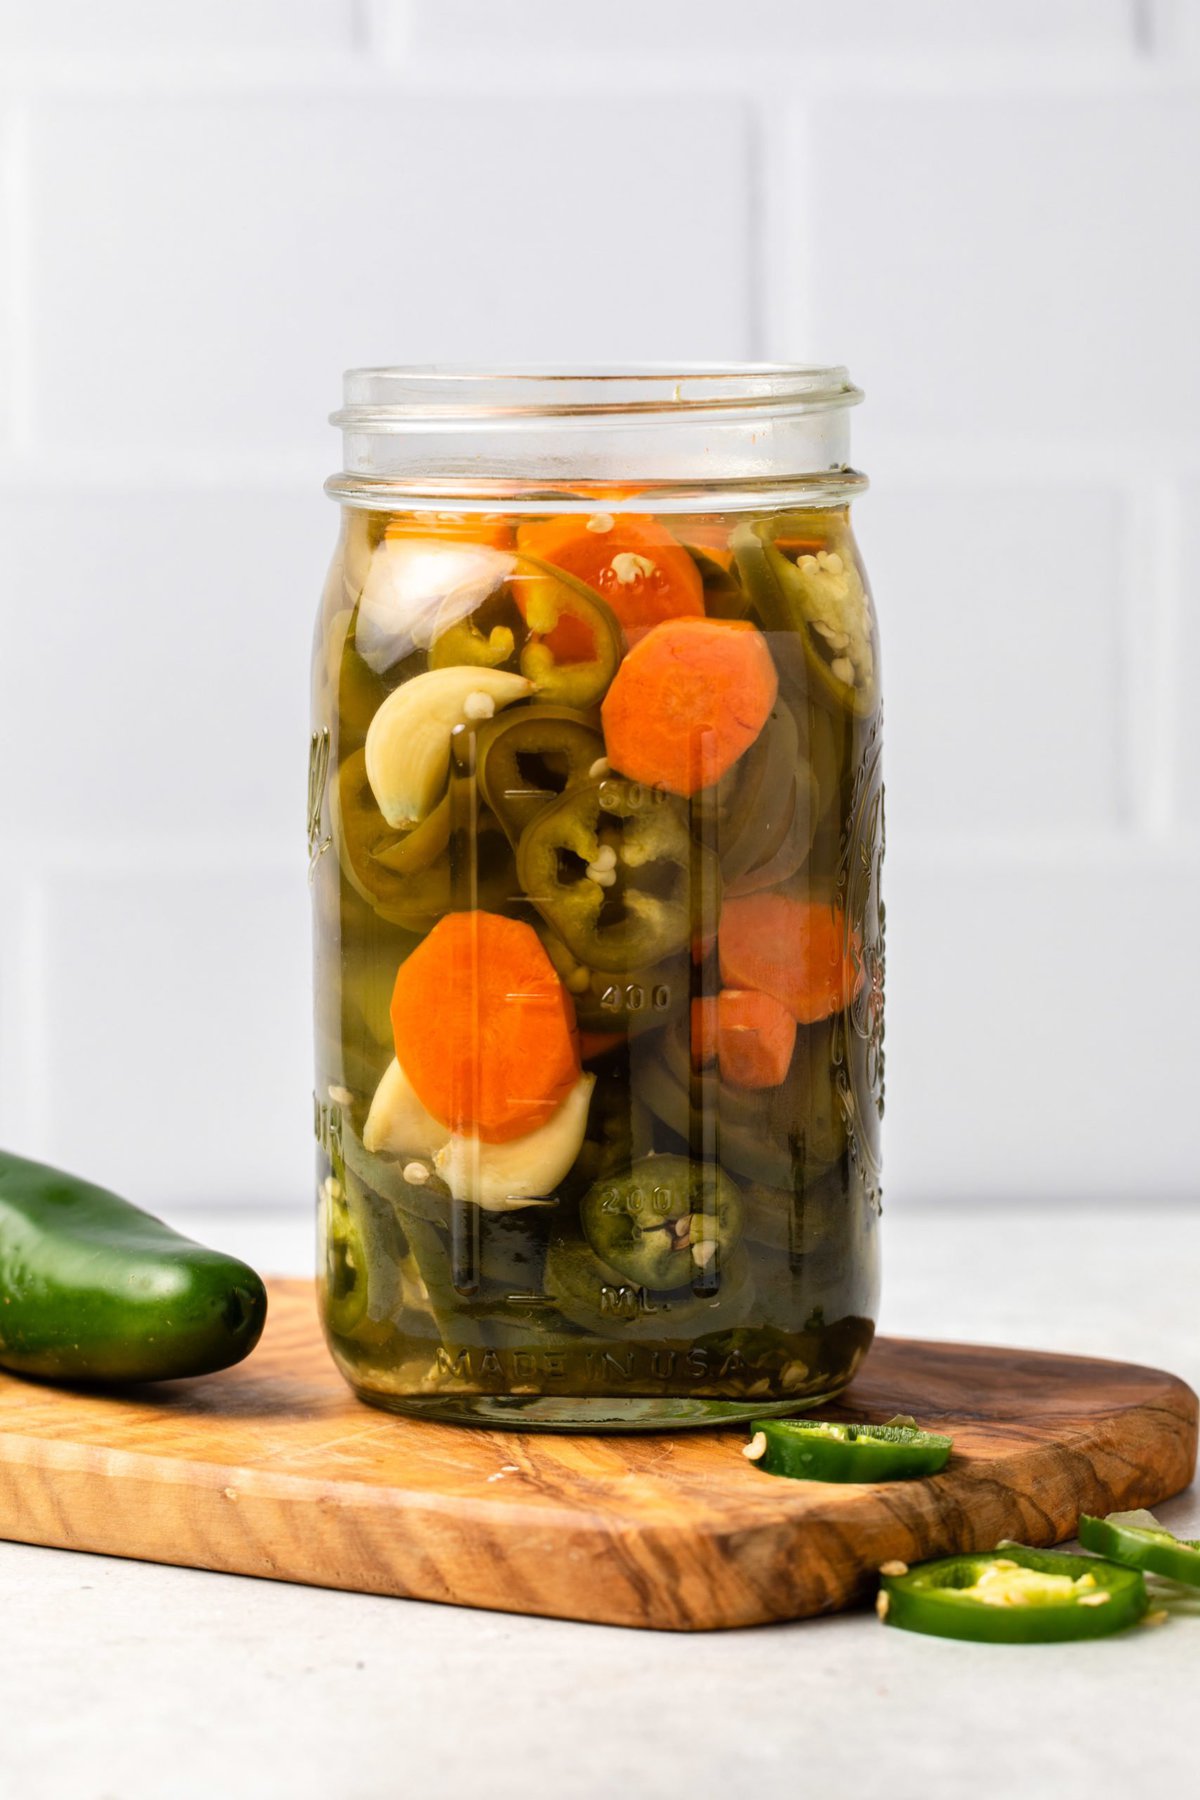 Large glass jar of pickled jalapeños, carrots, and garlic in brine on small wood cutting board. Slices of fresh jalapeños are around the jar.